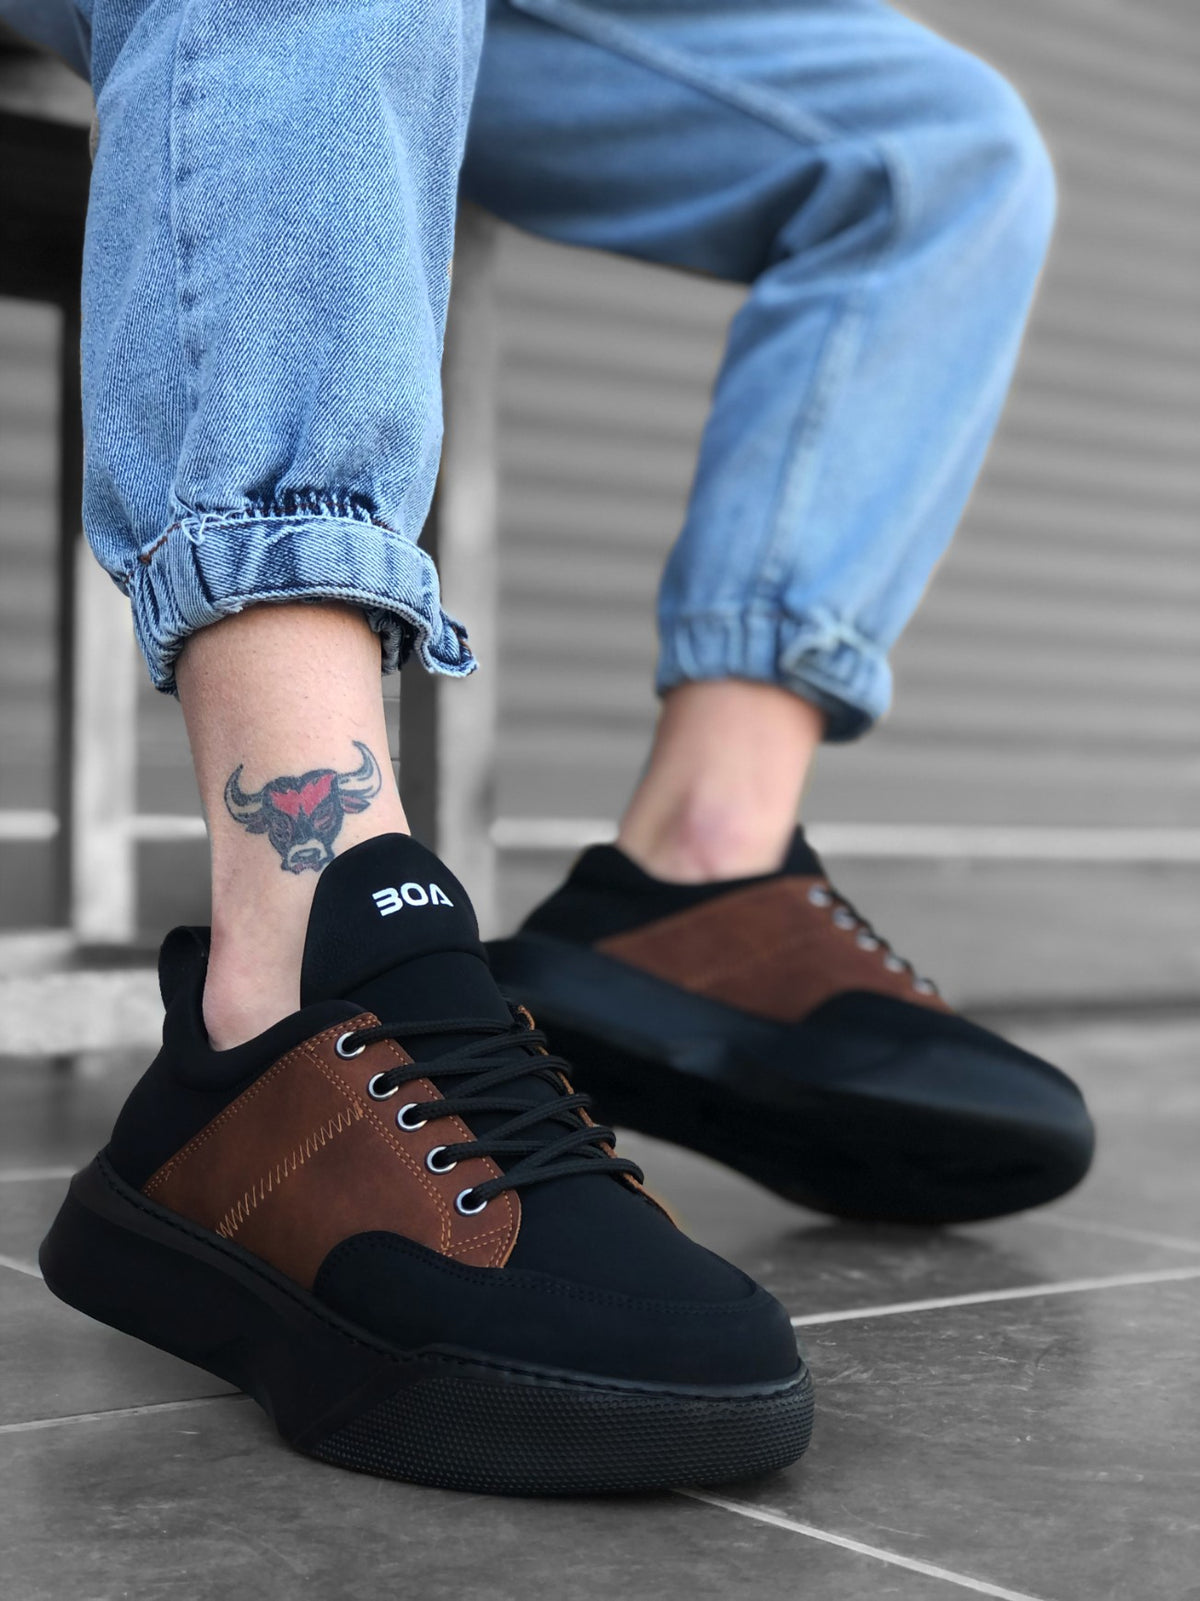 BA0163 Lace-up Men's High-Sole Black Tan Sneakers - STREETMODE ™